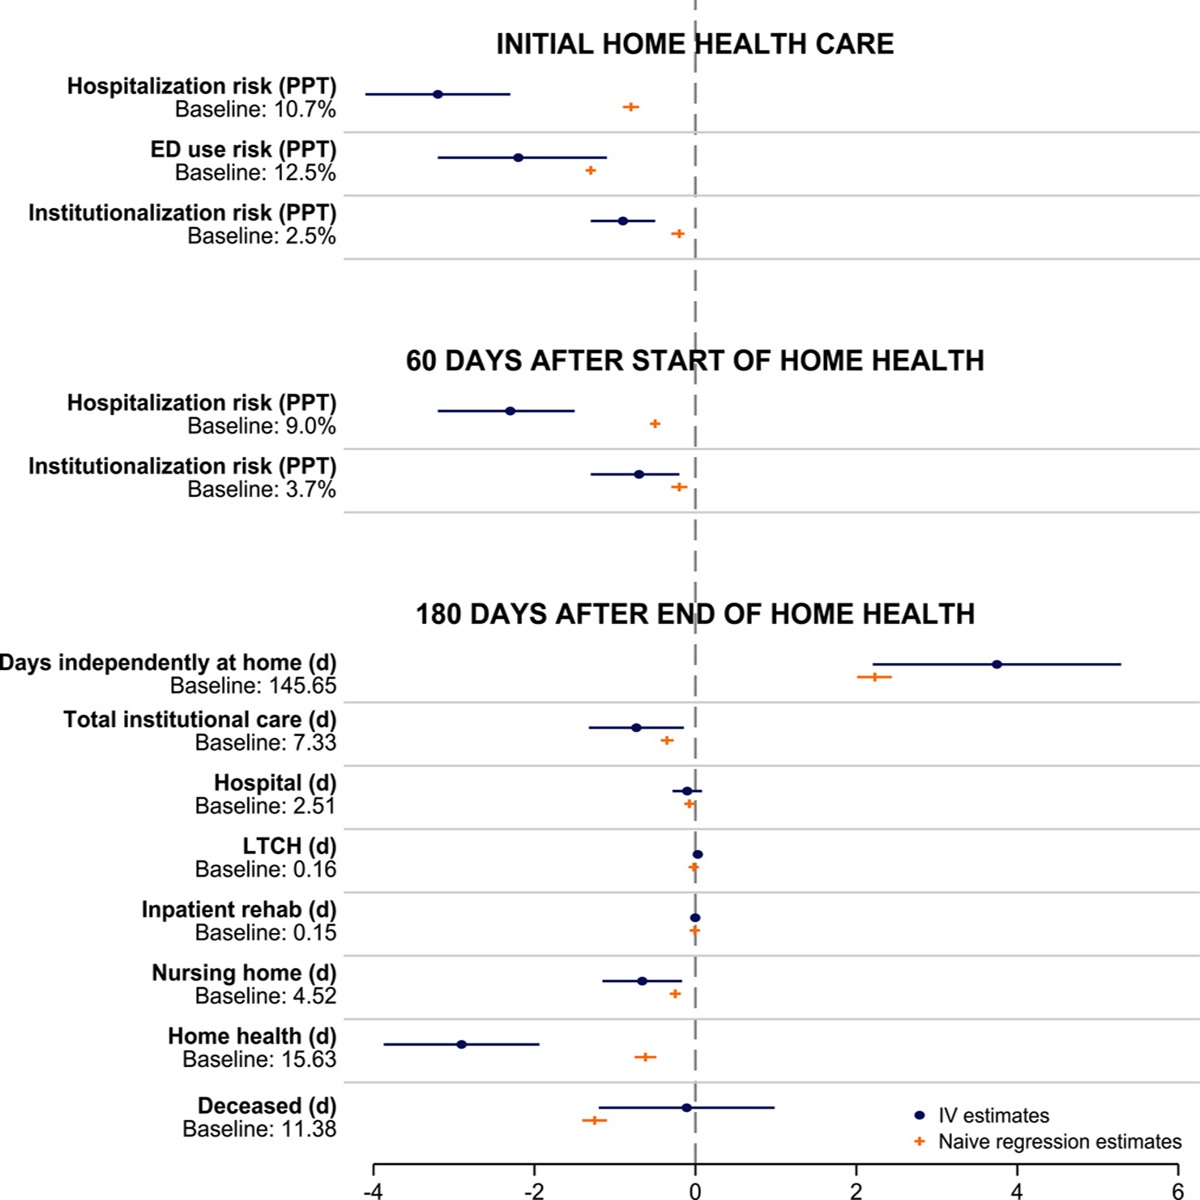 Home Health Agencies With High Quality of Patient Care Star Ratings Reduced Short-Term Hospitalization Rates and Increased Days Independently at Home